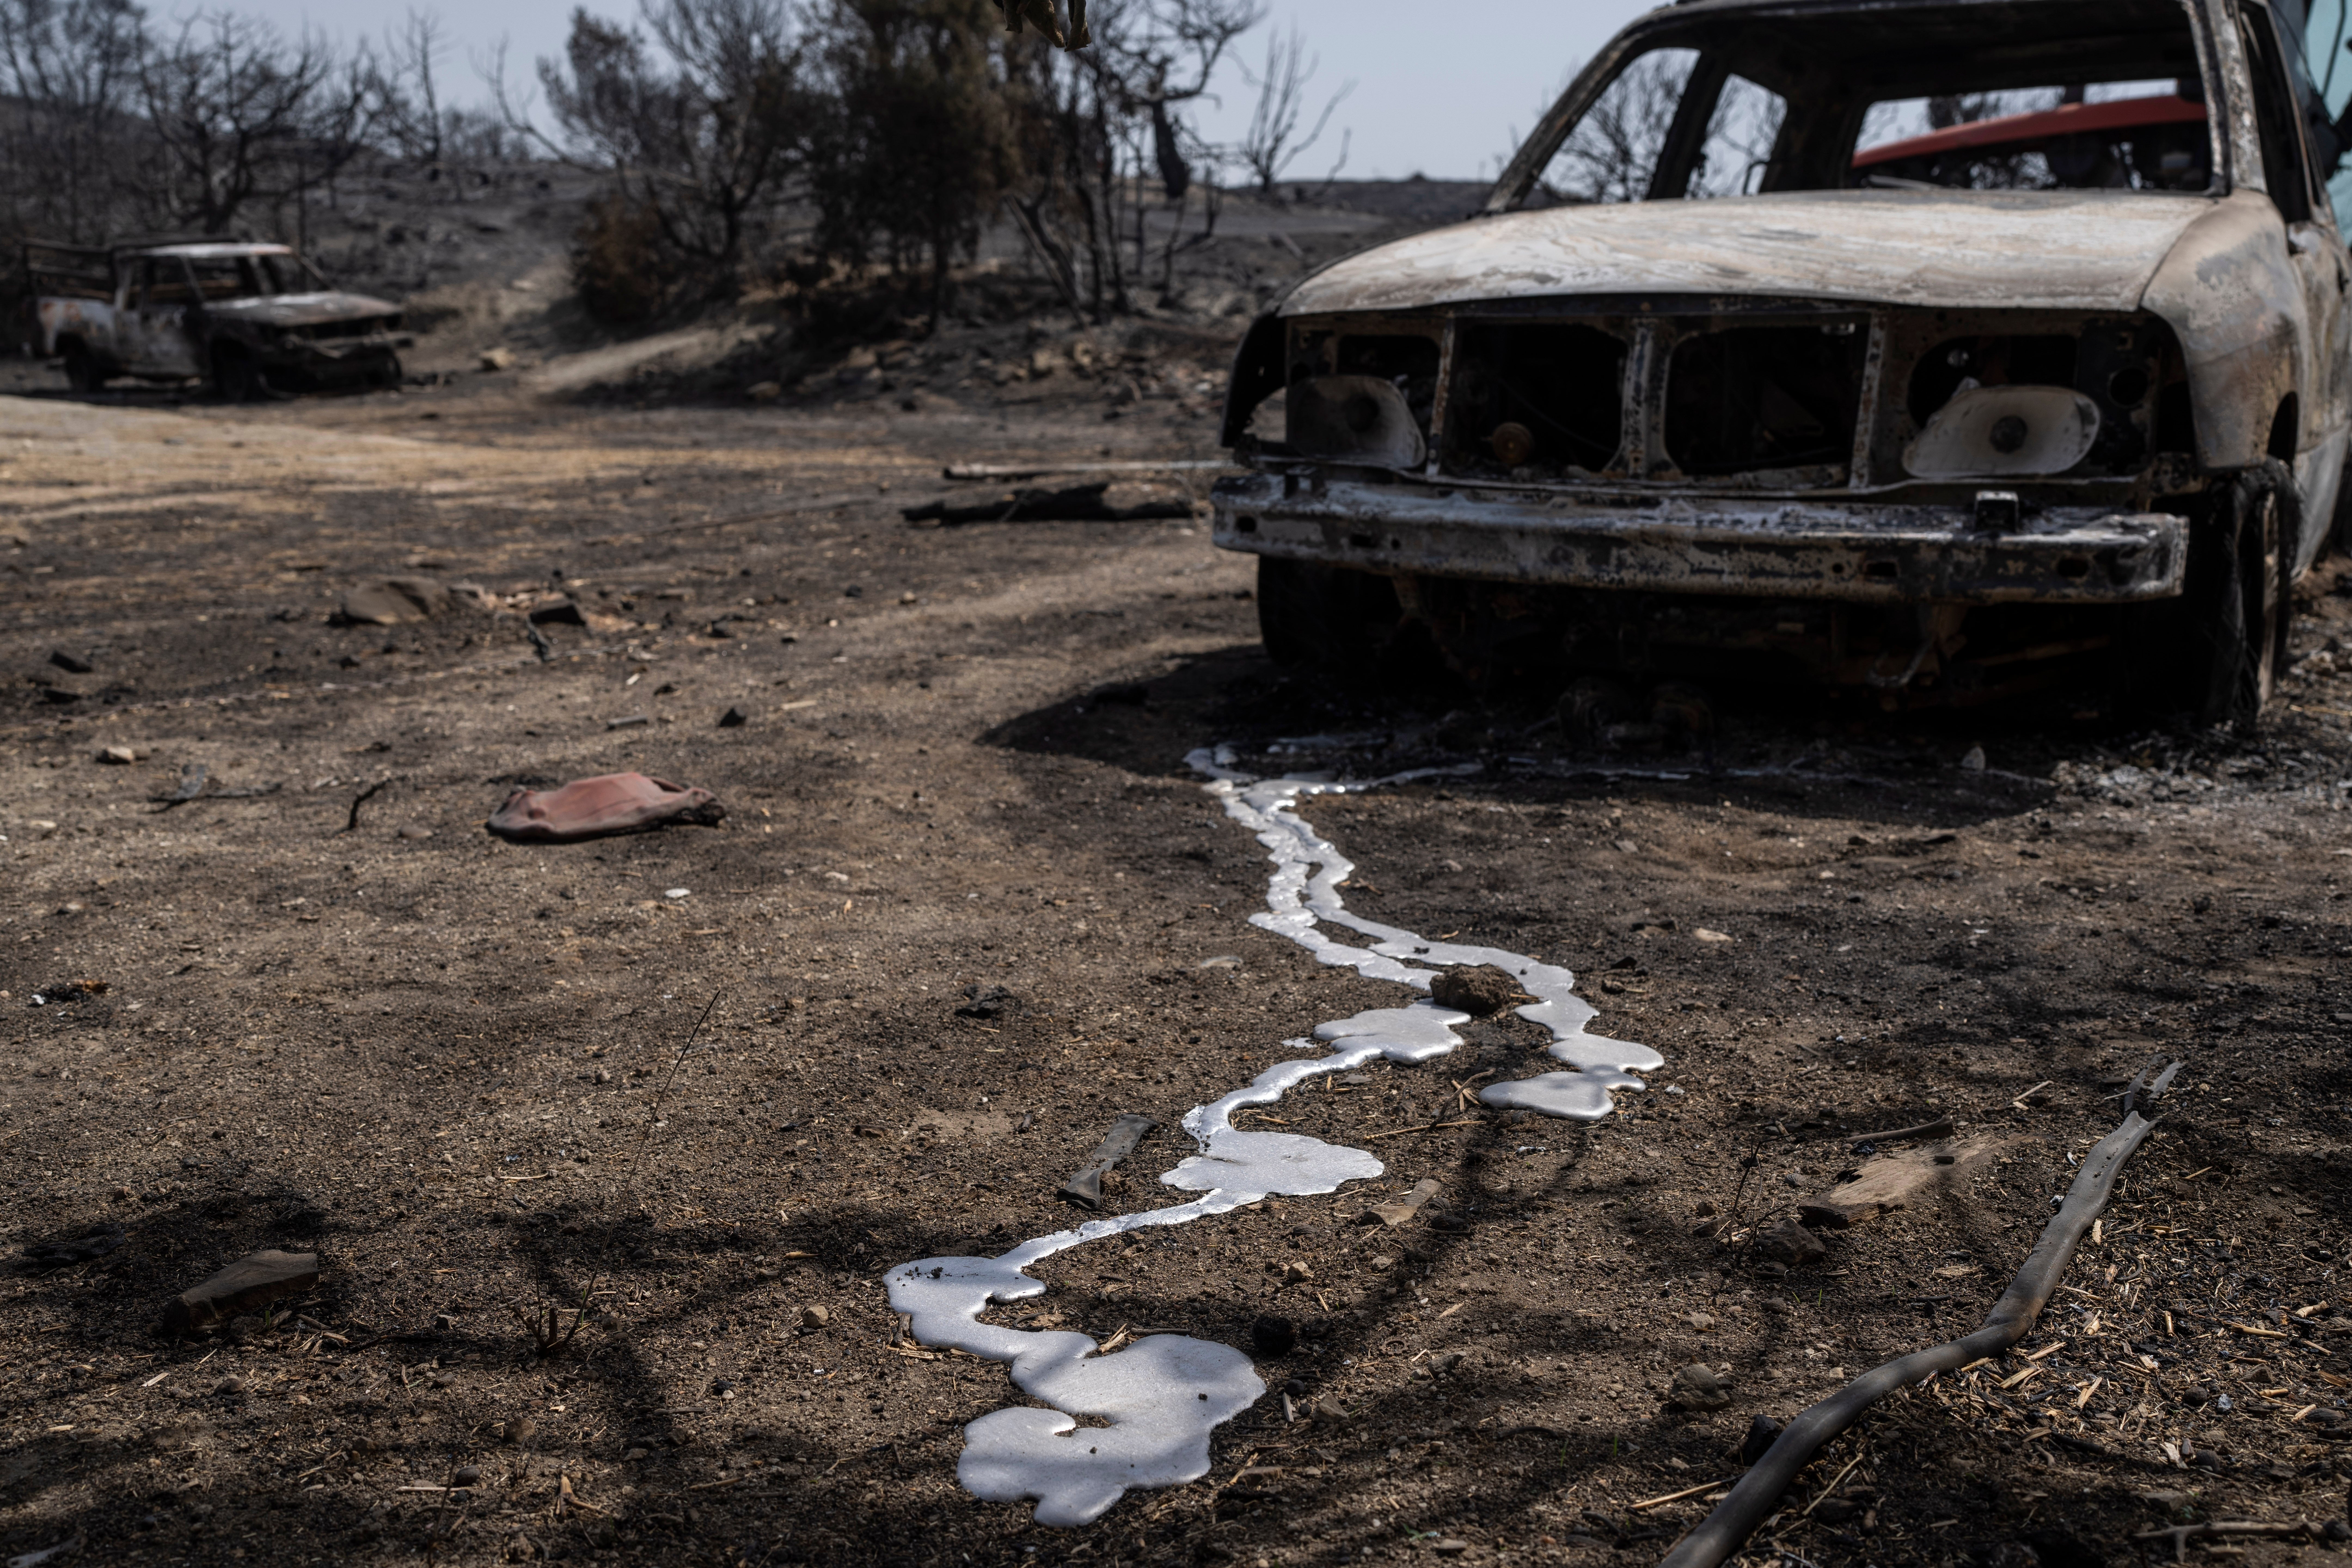 Burnt cars are seen after a wildfire near Gennadi village, on the Aegean Sea island of Rhodes